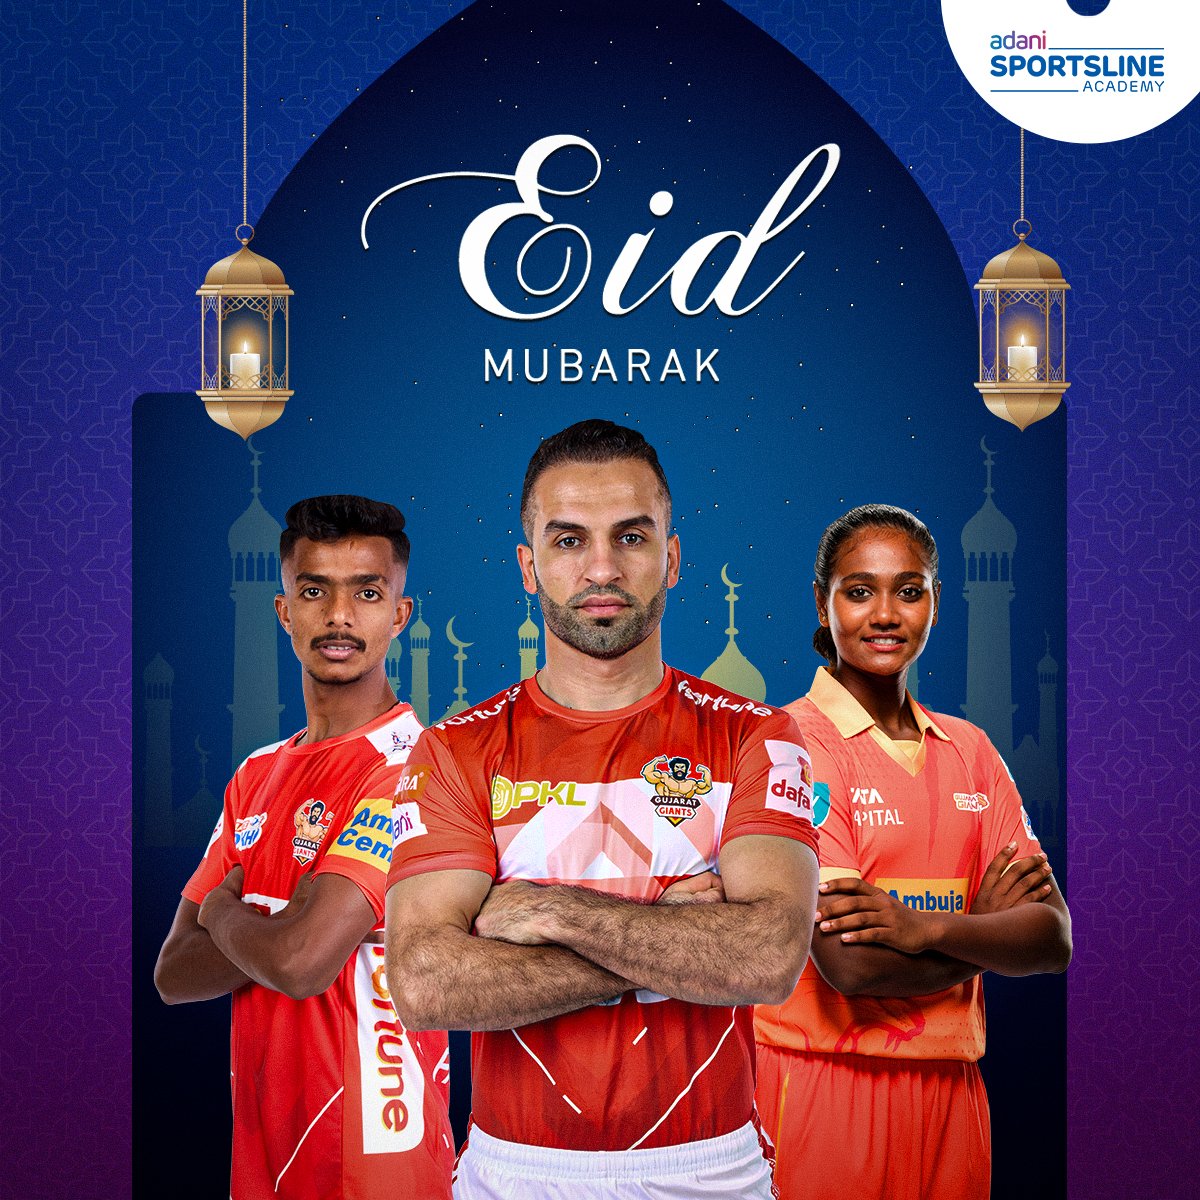 Sabhi ko Eid Mubarak 🌙 May this Eid bring only happiness, peace and prosperity to you and your family! ❤️ #AdaniSportsline